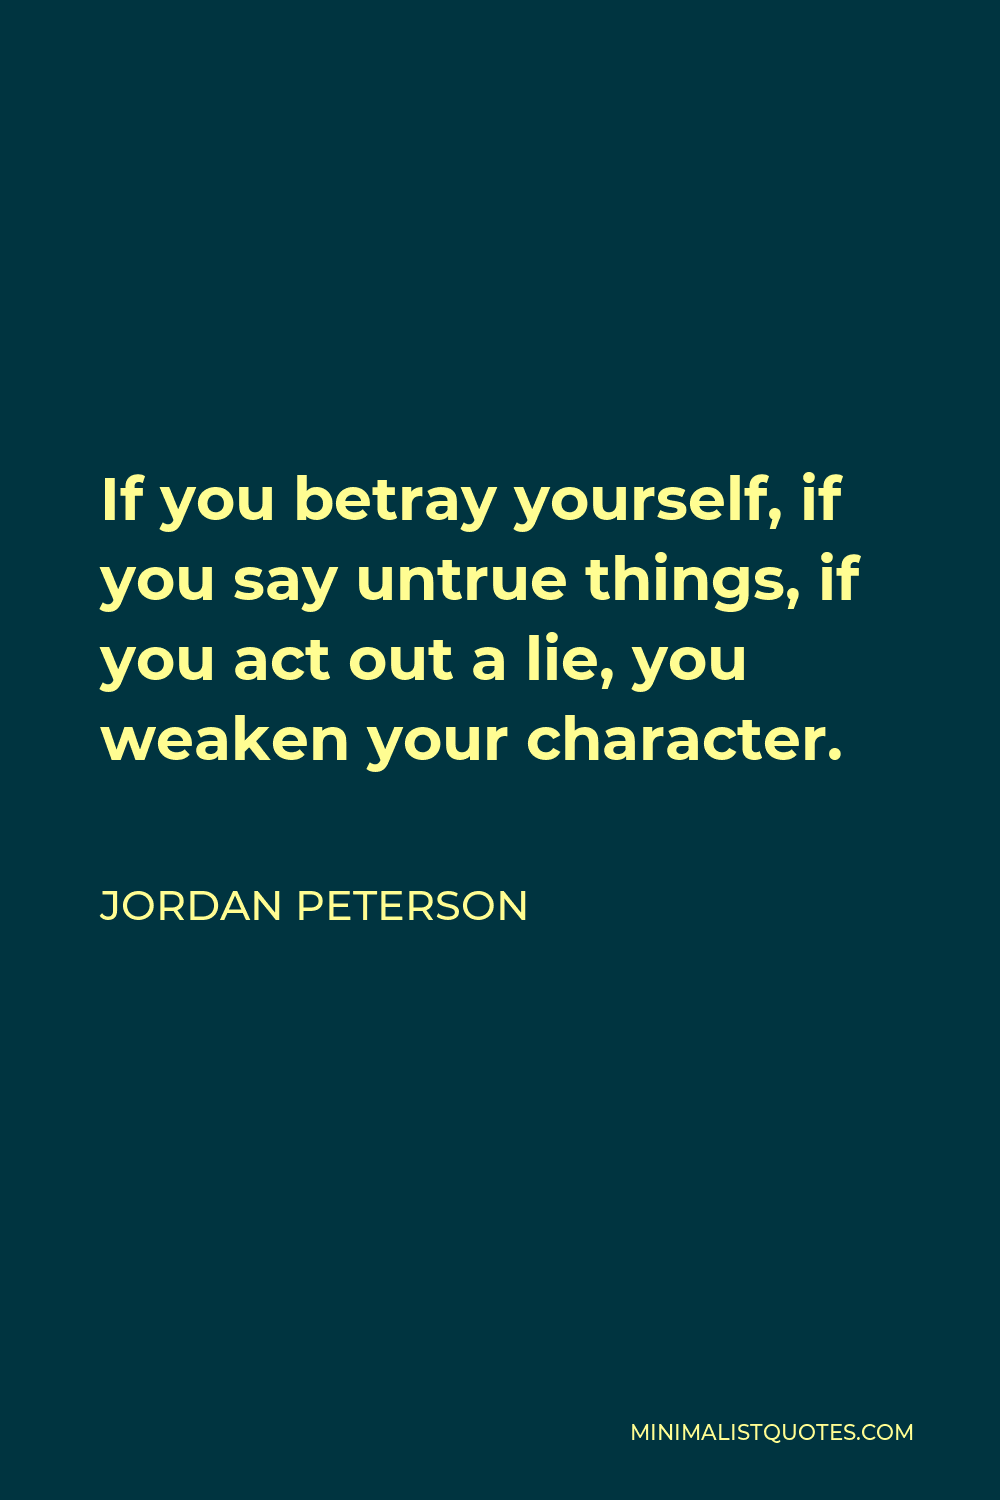 Jordan Peterson Quote - If you betray yourself, if you say untrue things, if you act out a lie, you weaken your character.